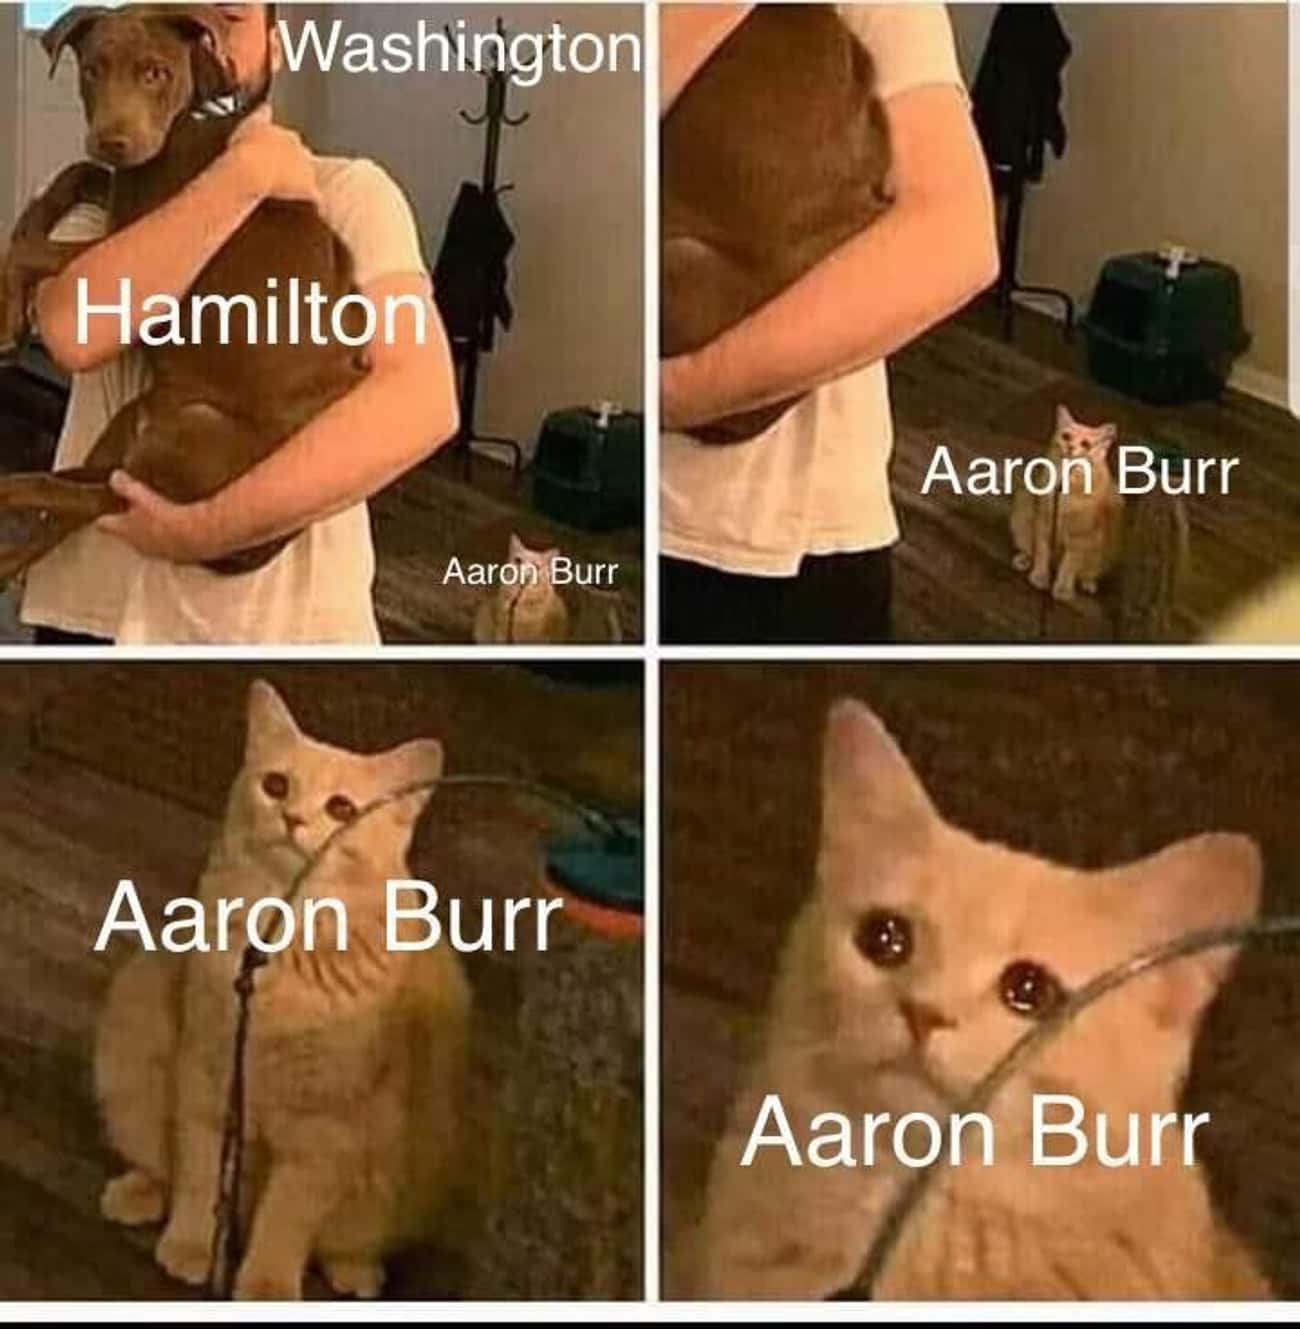 What About Burr, Sir?